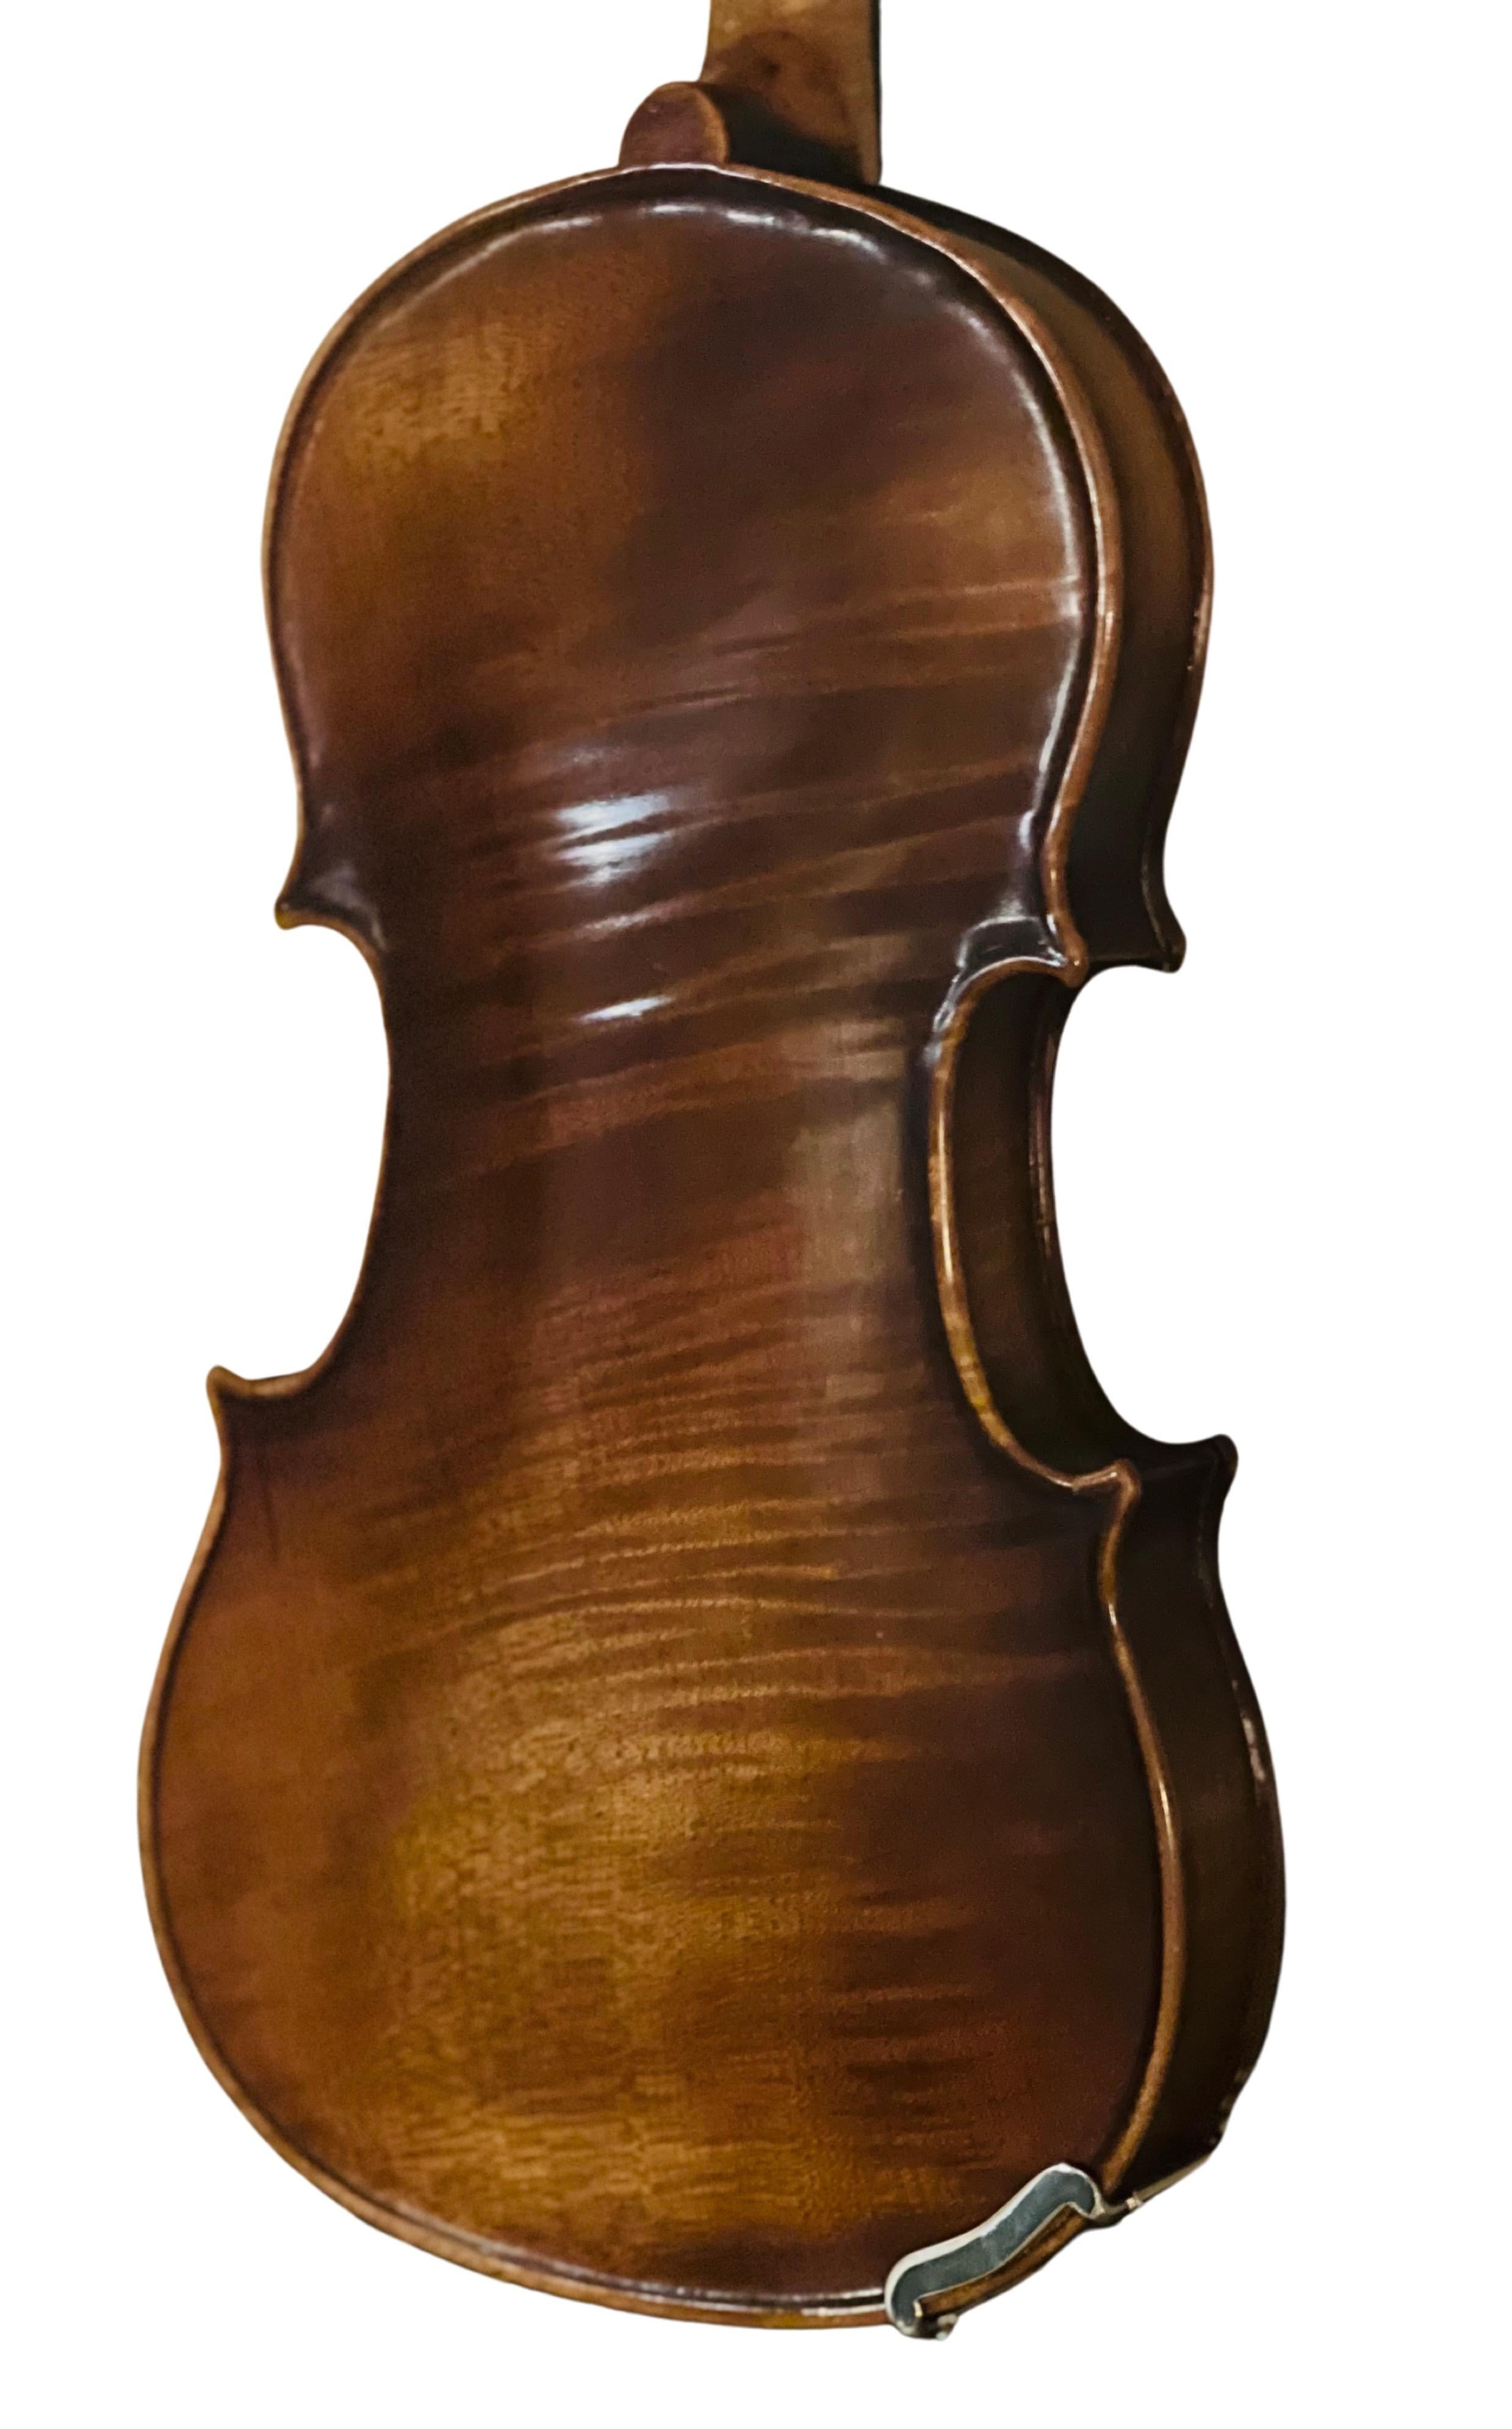 Fait main 1970 3/4 E.R. Pfretzschner Hand-Crafted Violin in the Style of A. Stradivarius en vente